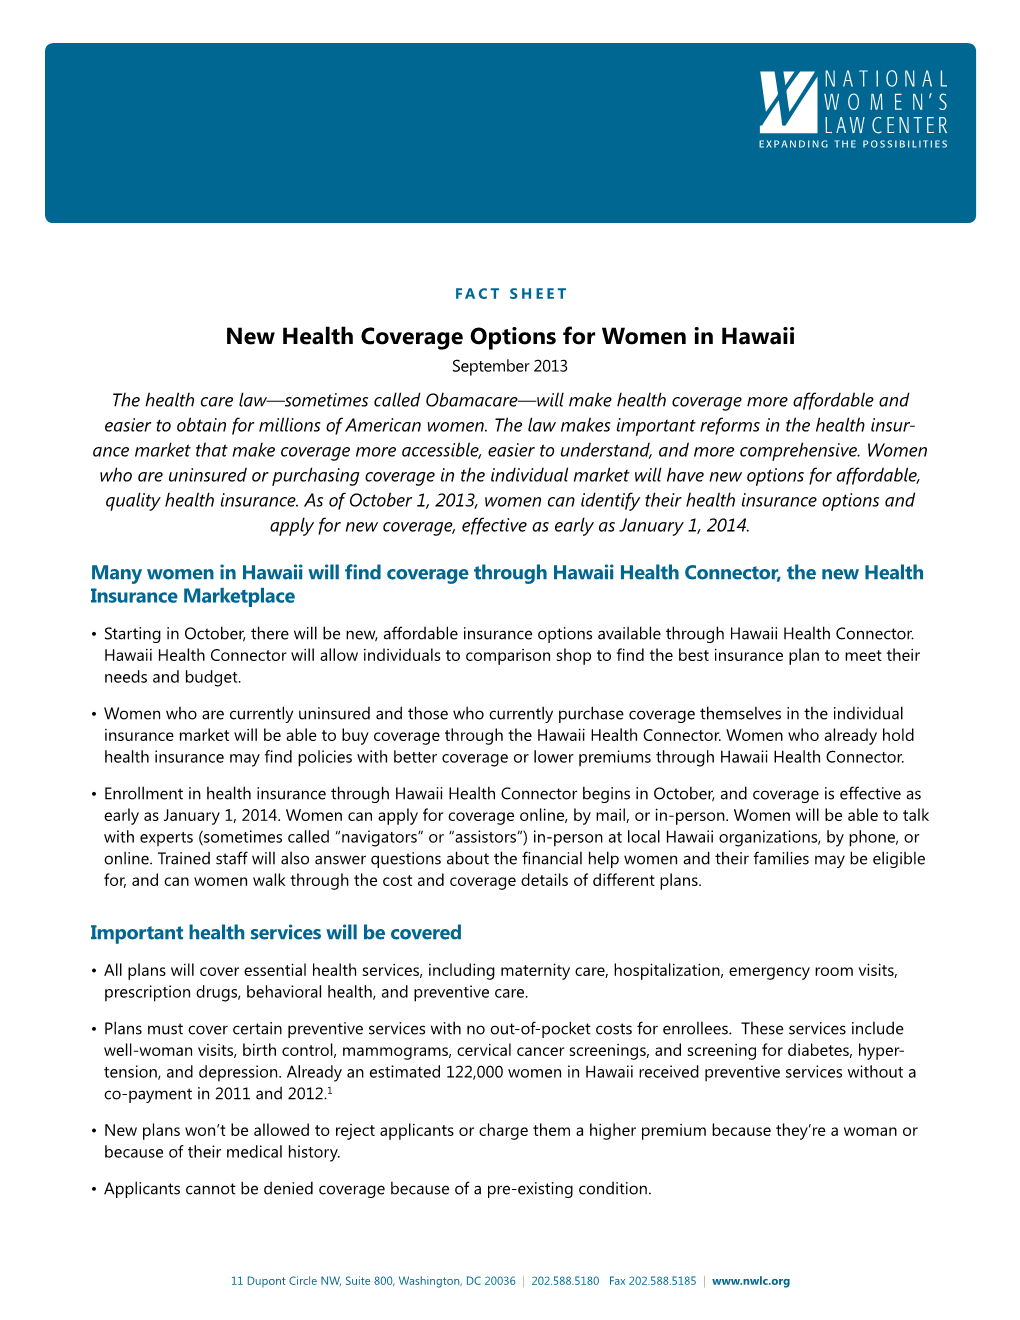 New Health Coverage Options for Women in Hawaii